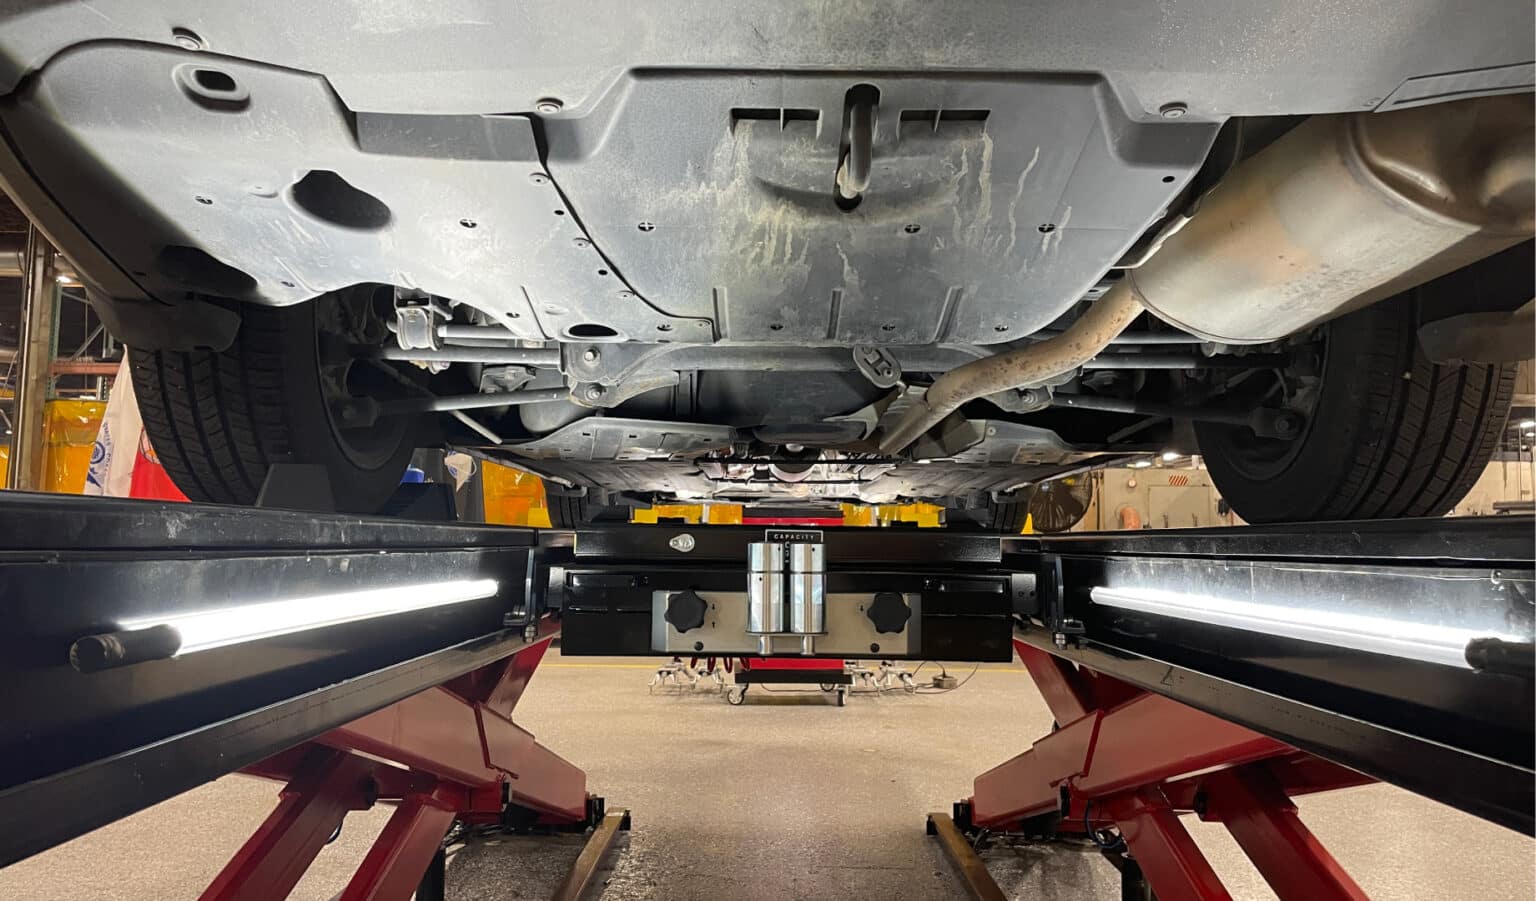 LED tub lighting lines the inside length of the lift runways to illuminate the underside of the car that is on the alignment lift